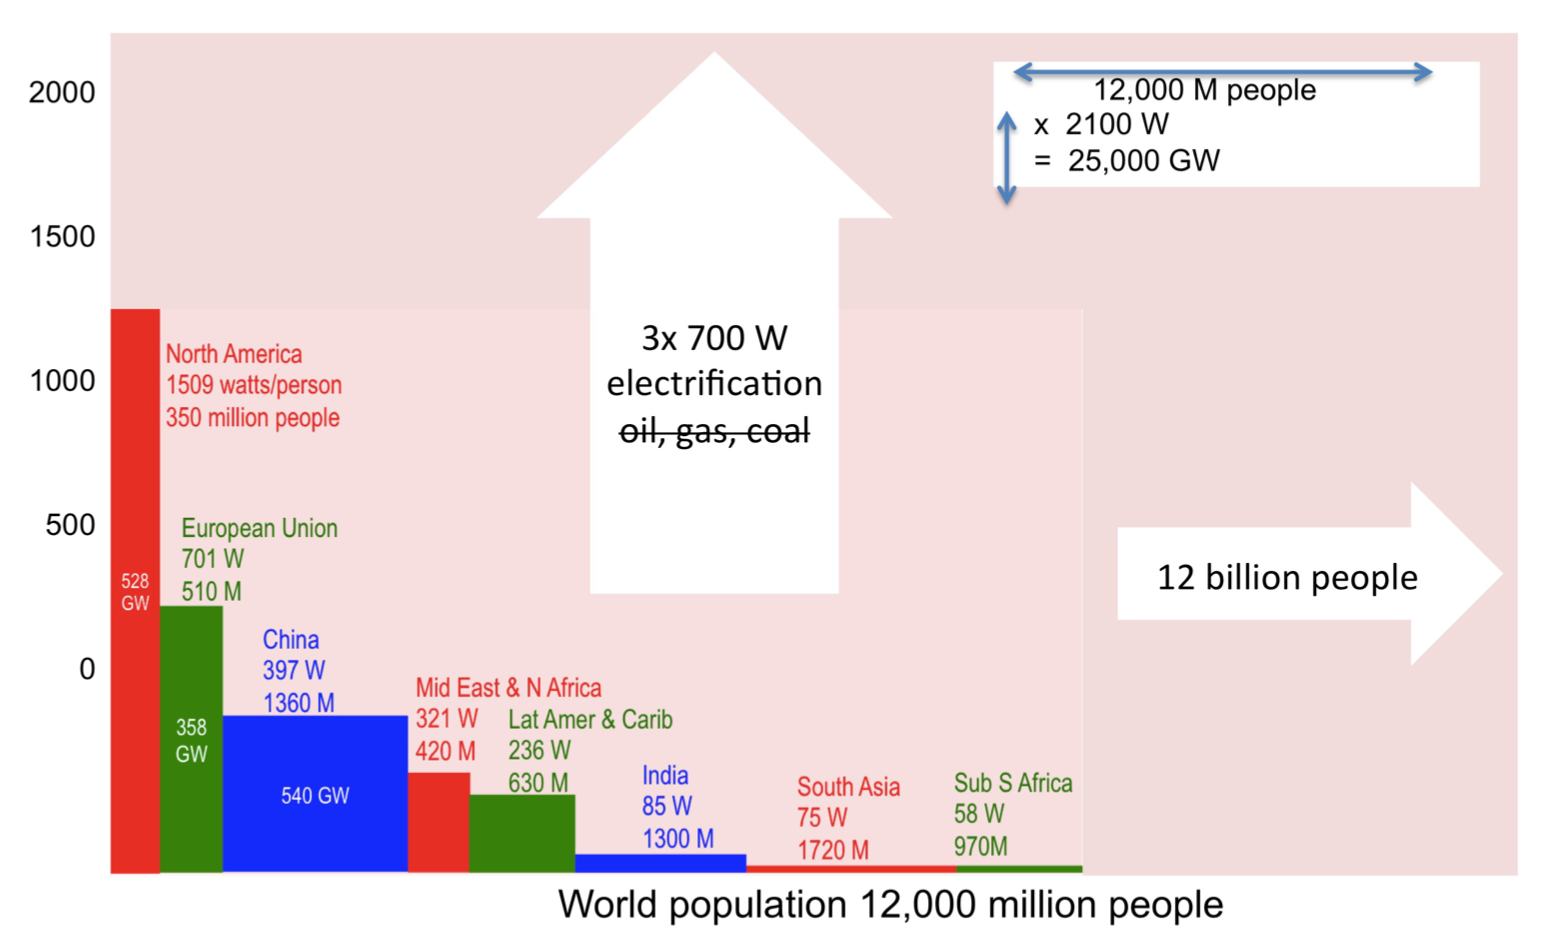 Devanney Fig 1.4: Electricity consumption in a decarbonized world